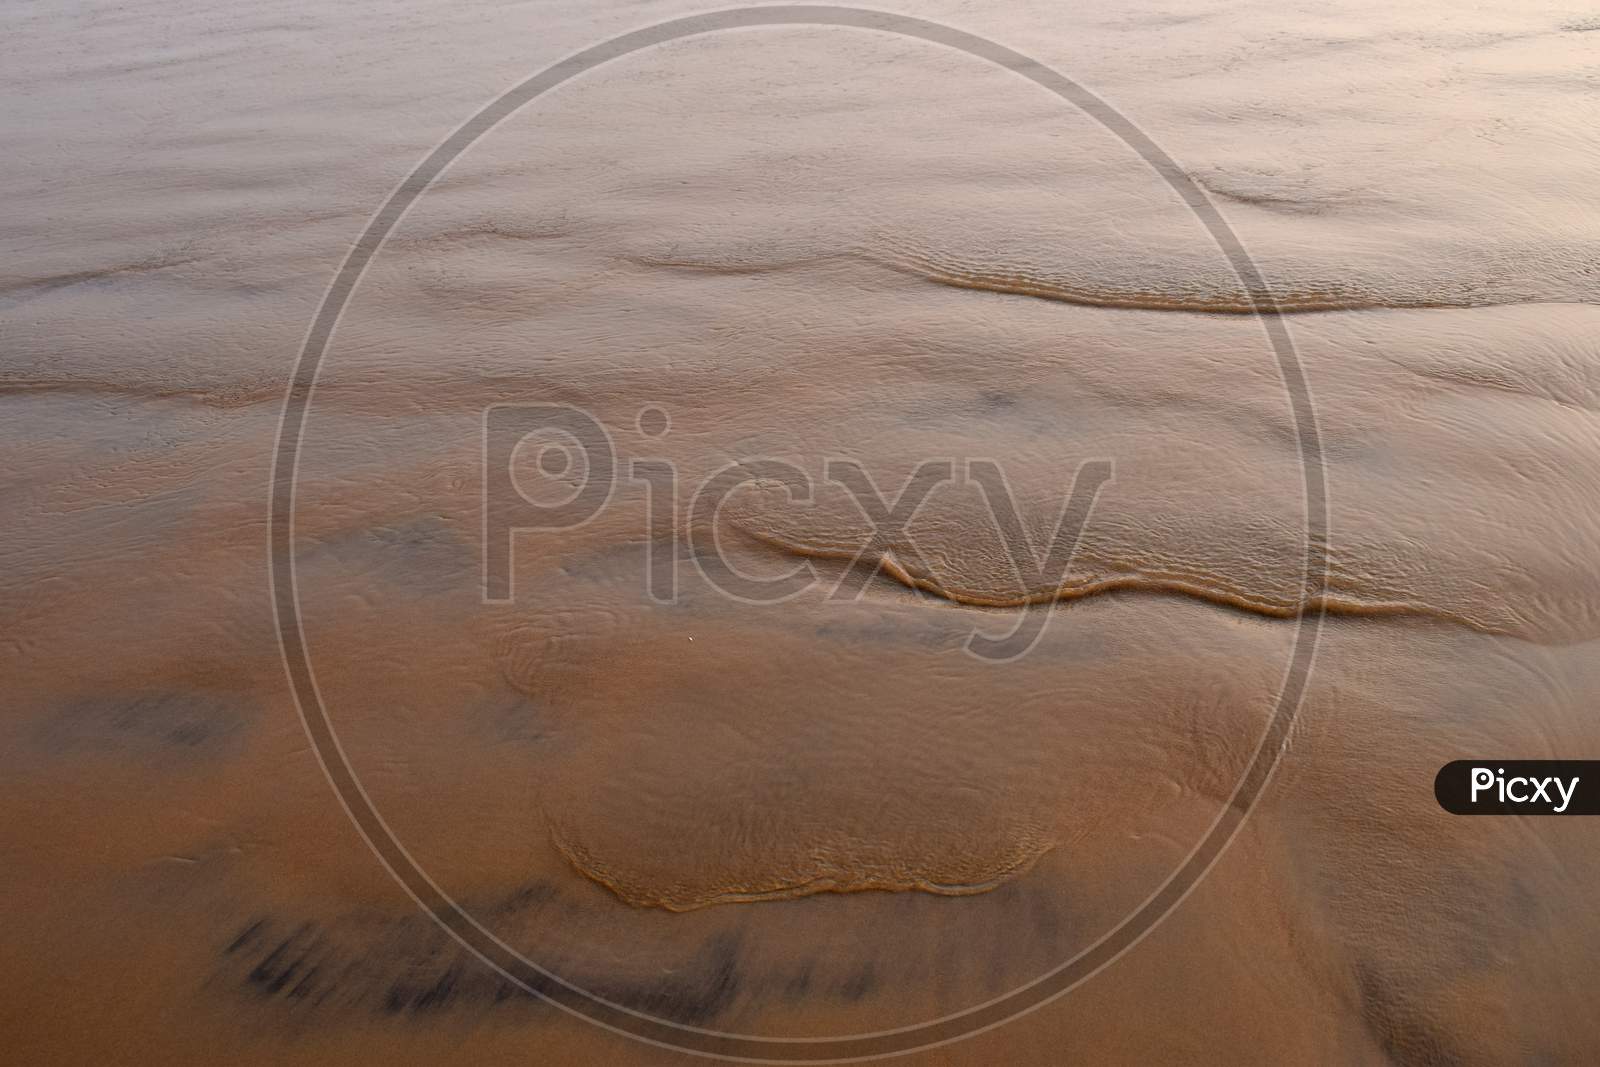 Waves Pattern On Sand Beach. Close Up To Sand Texture With Wave Marks On The Beach